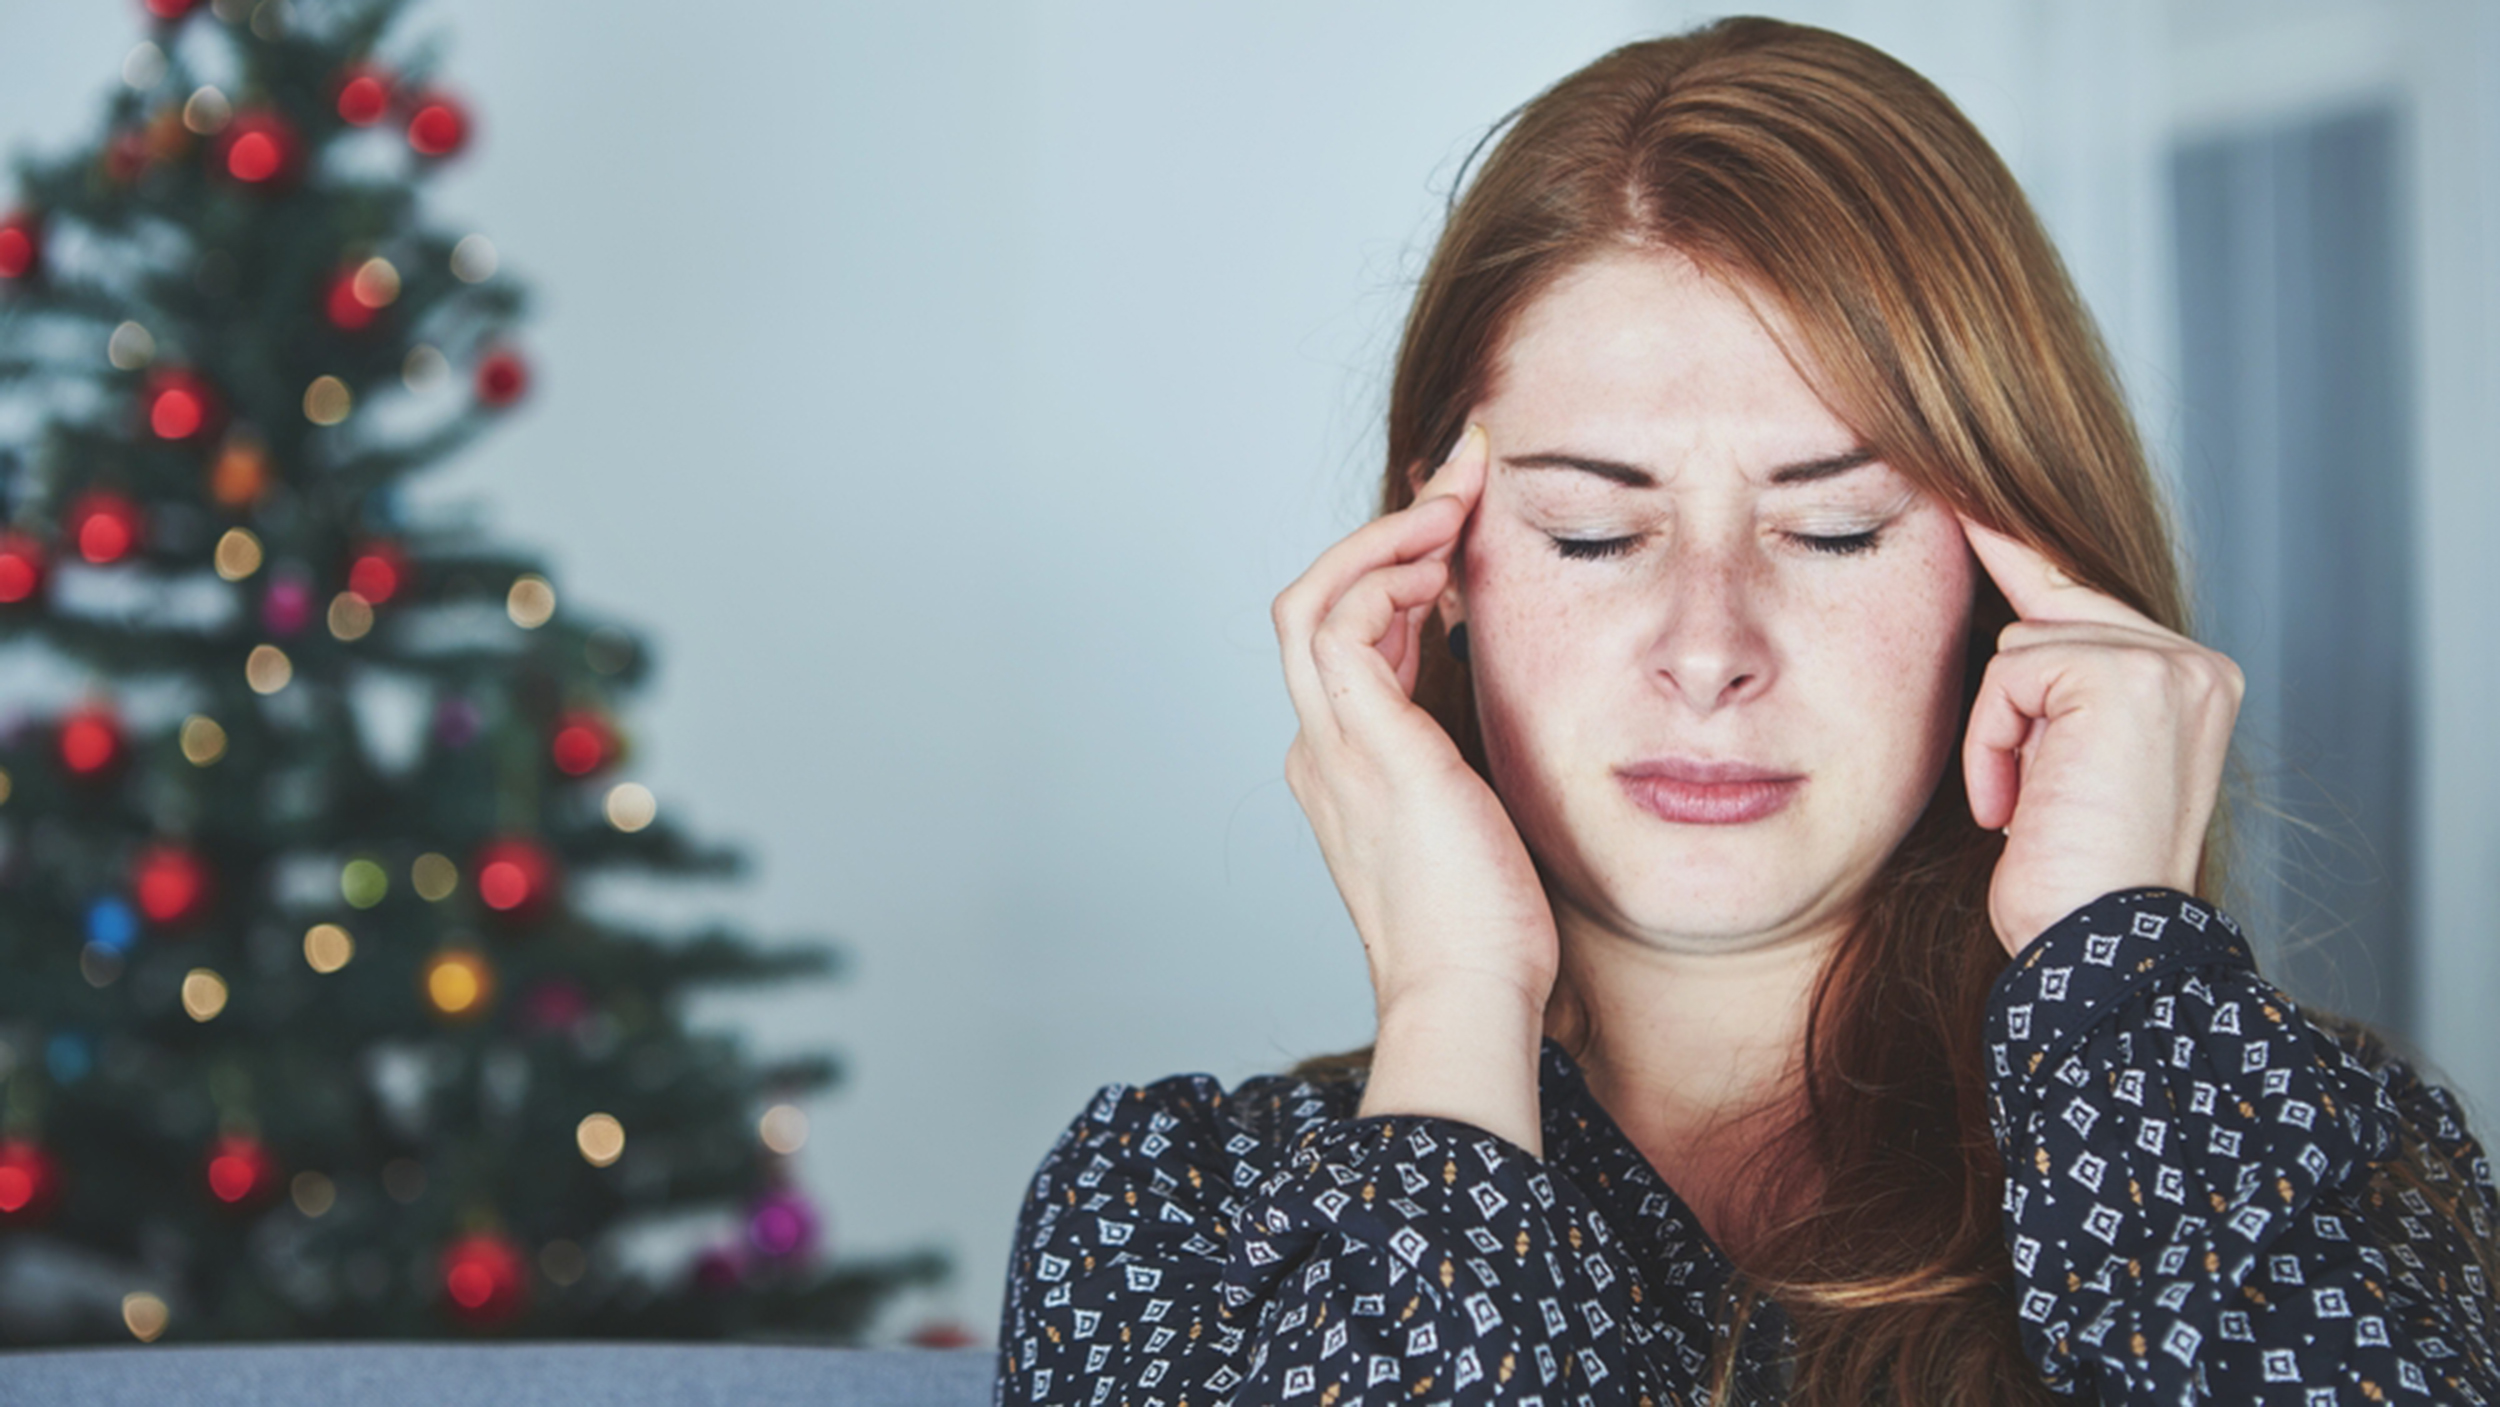 How to thrive in the midst of holiday stress